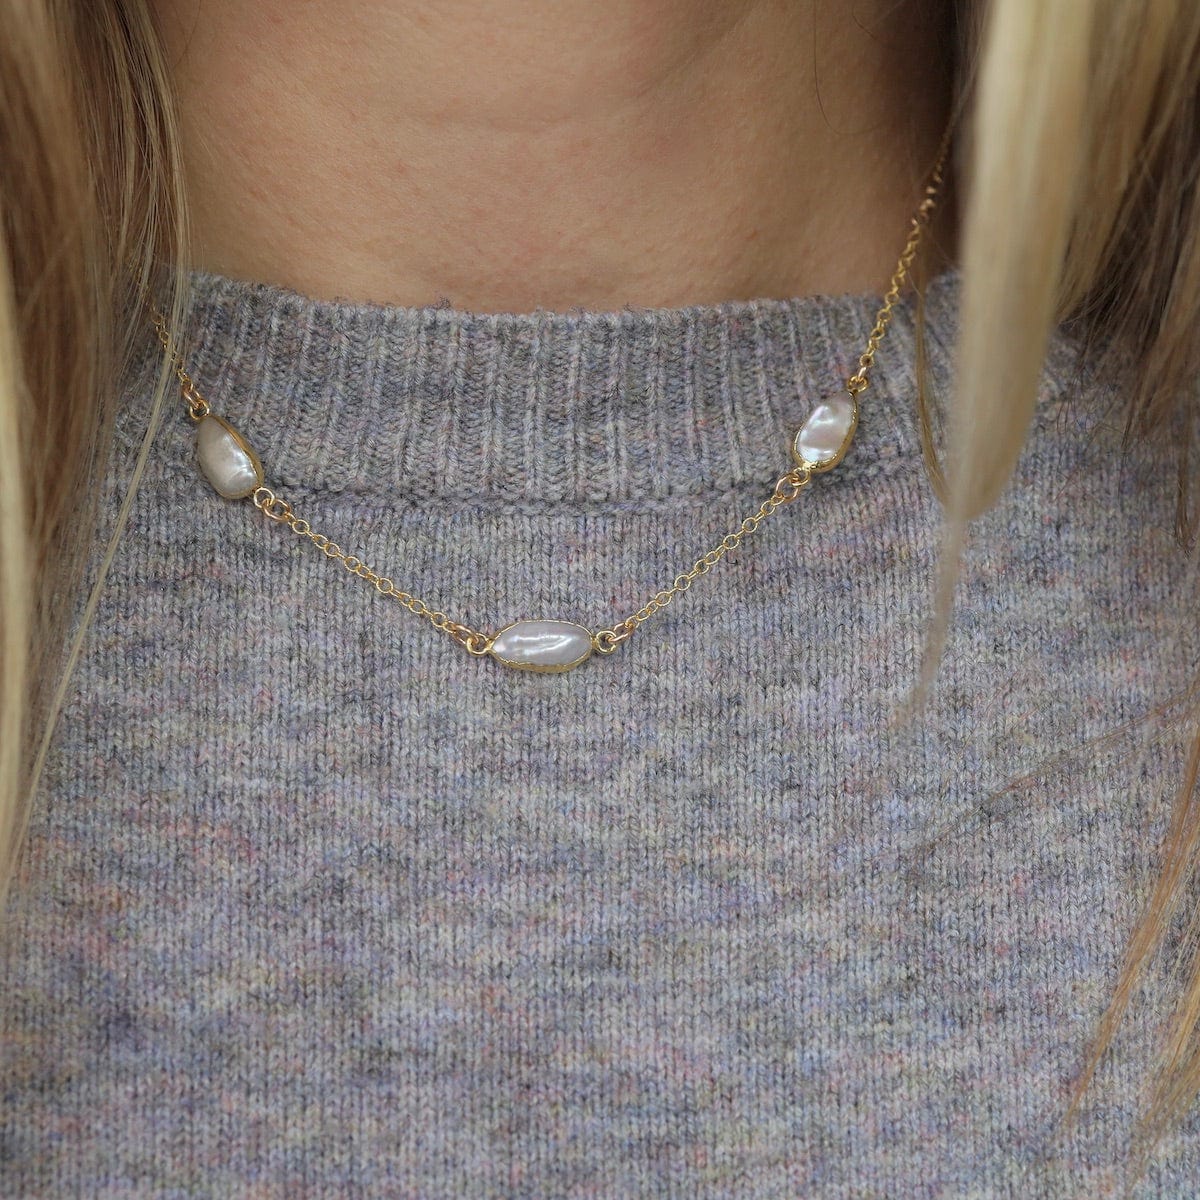 NKL-GF 3 Pearl Station Necklace